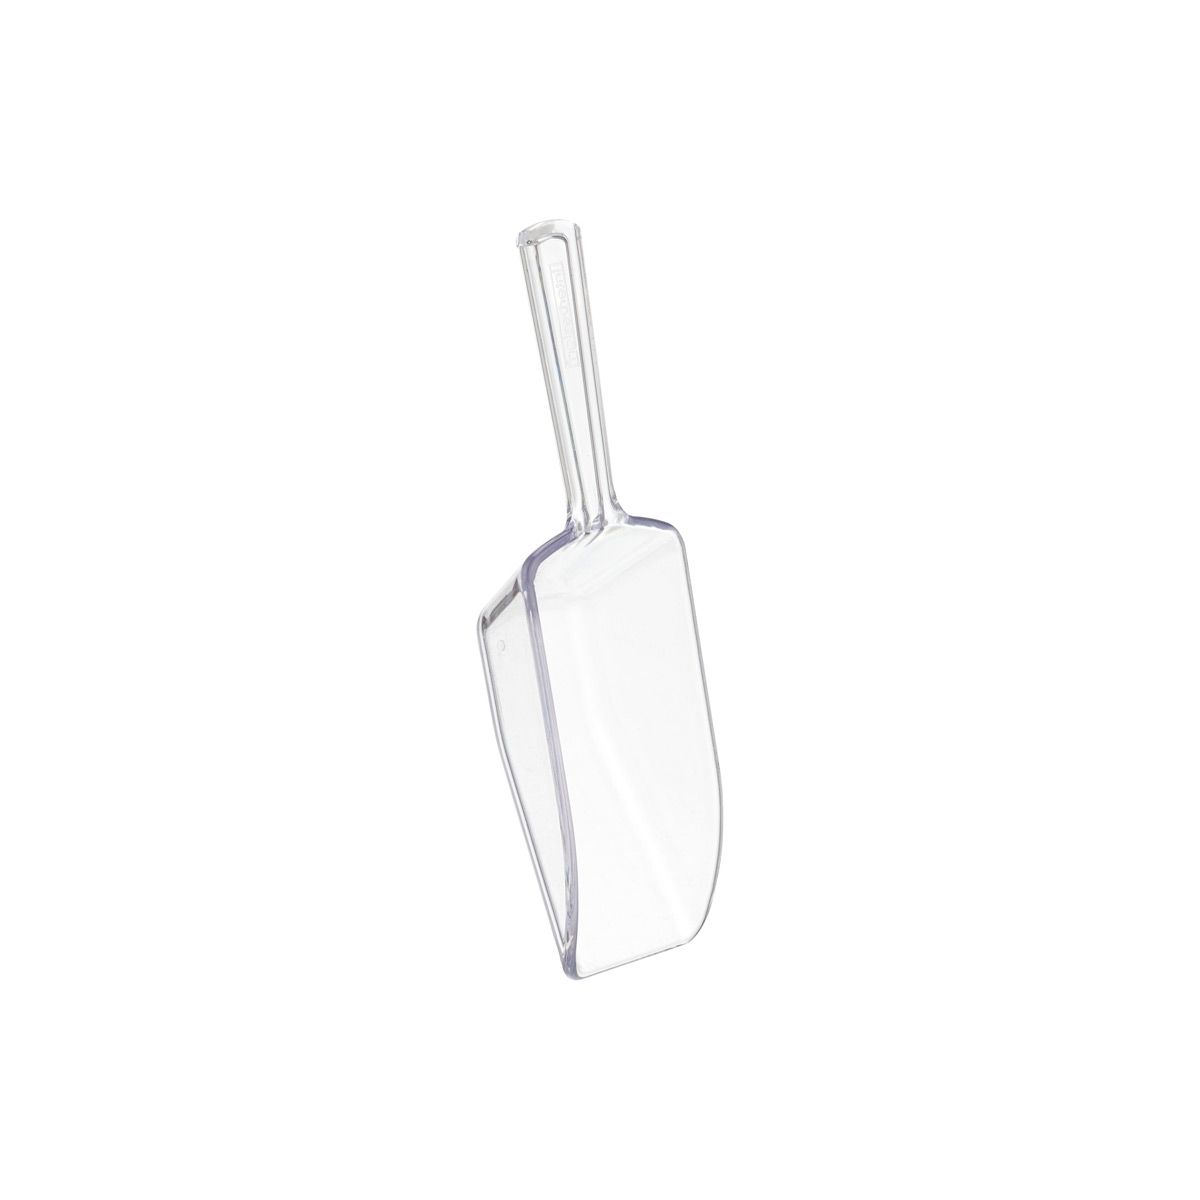 iDESIGN 1.1 oz. Scoop Clear | The Container Store